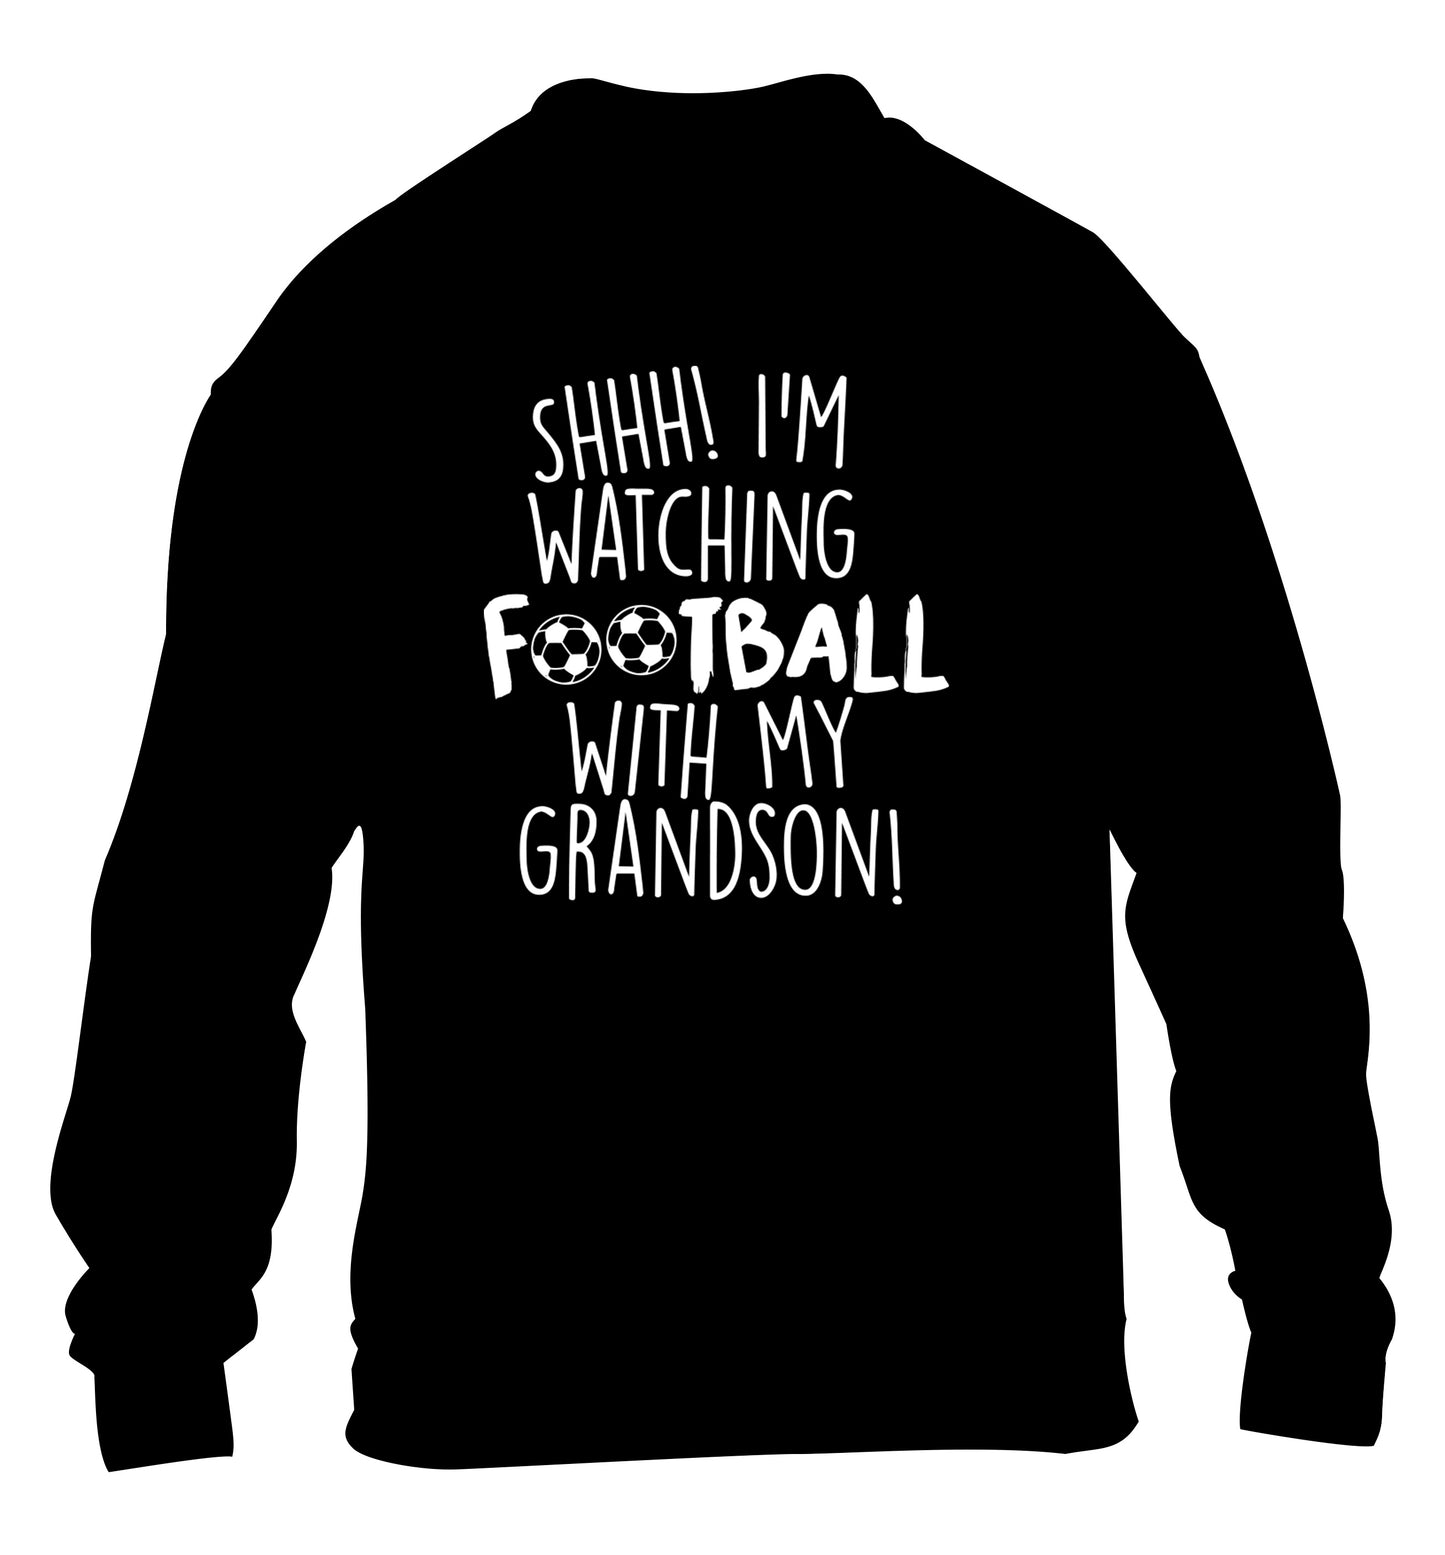 Shhh I'm watching football with my grandson children's black sweater 12-14 Years